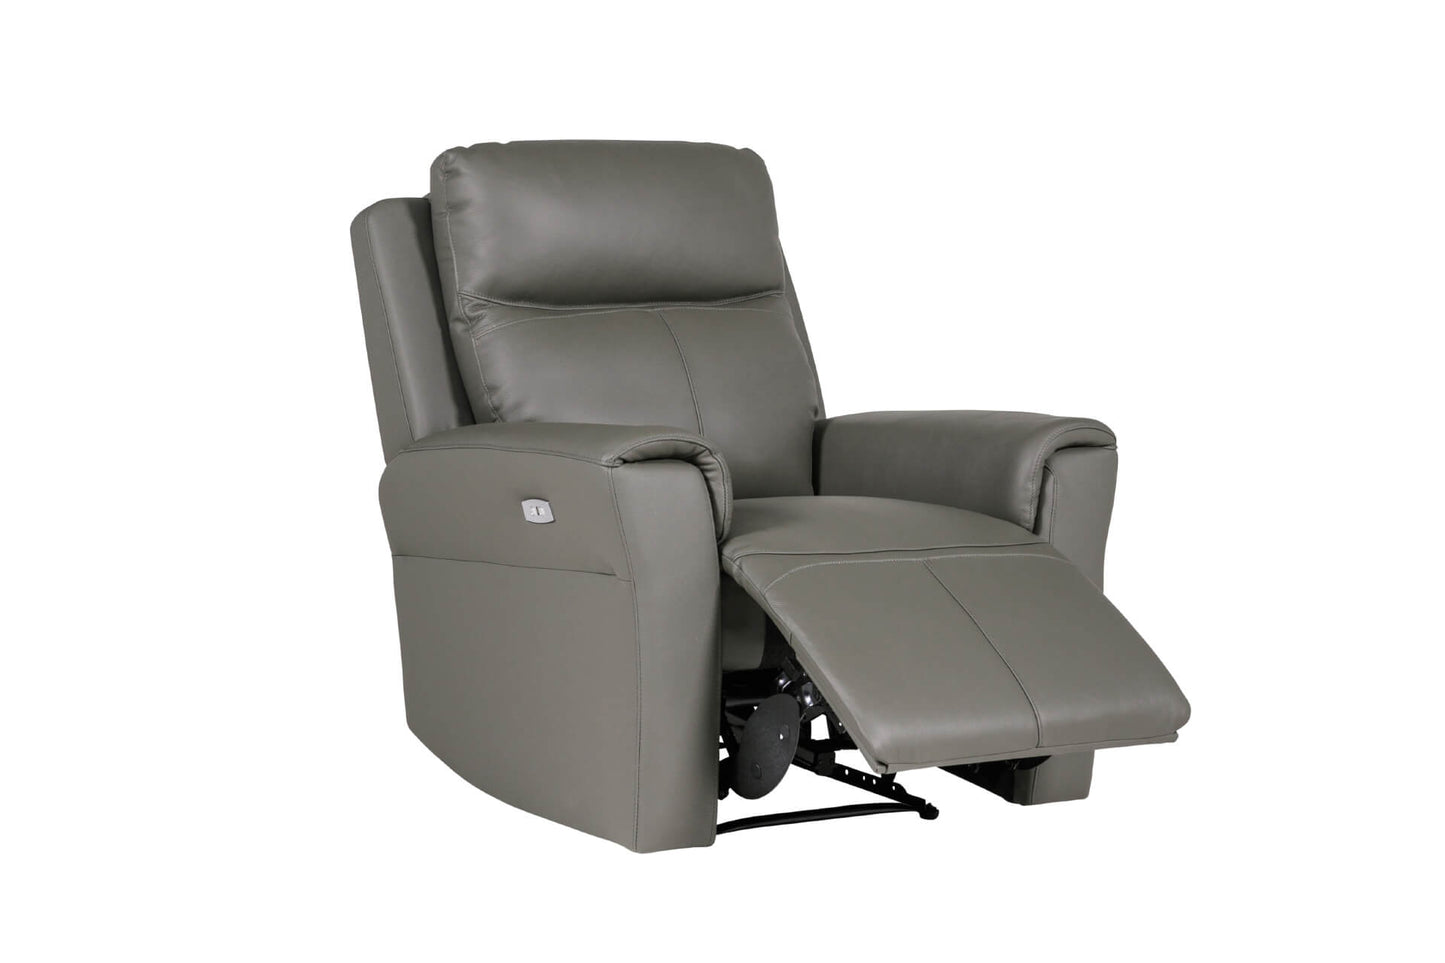 Russo - 1 Seater - Electric Recliner - Ash Leather